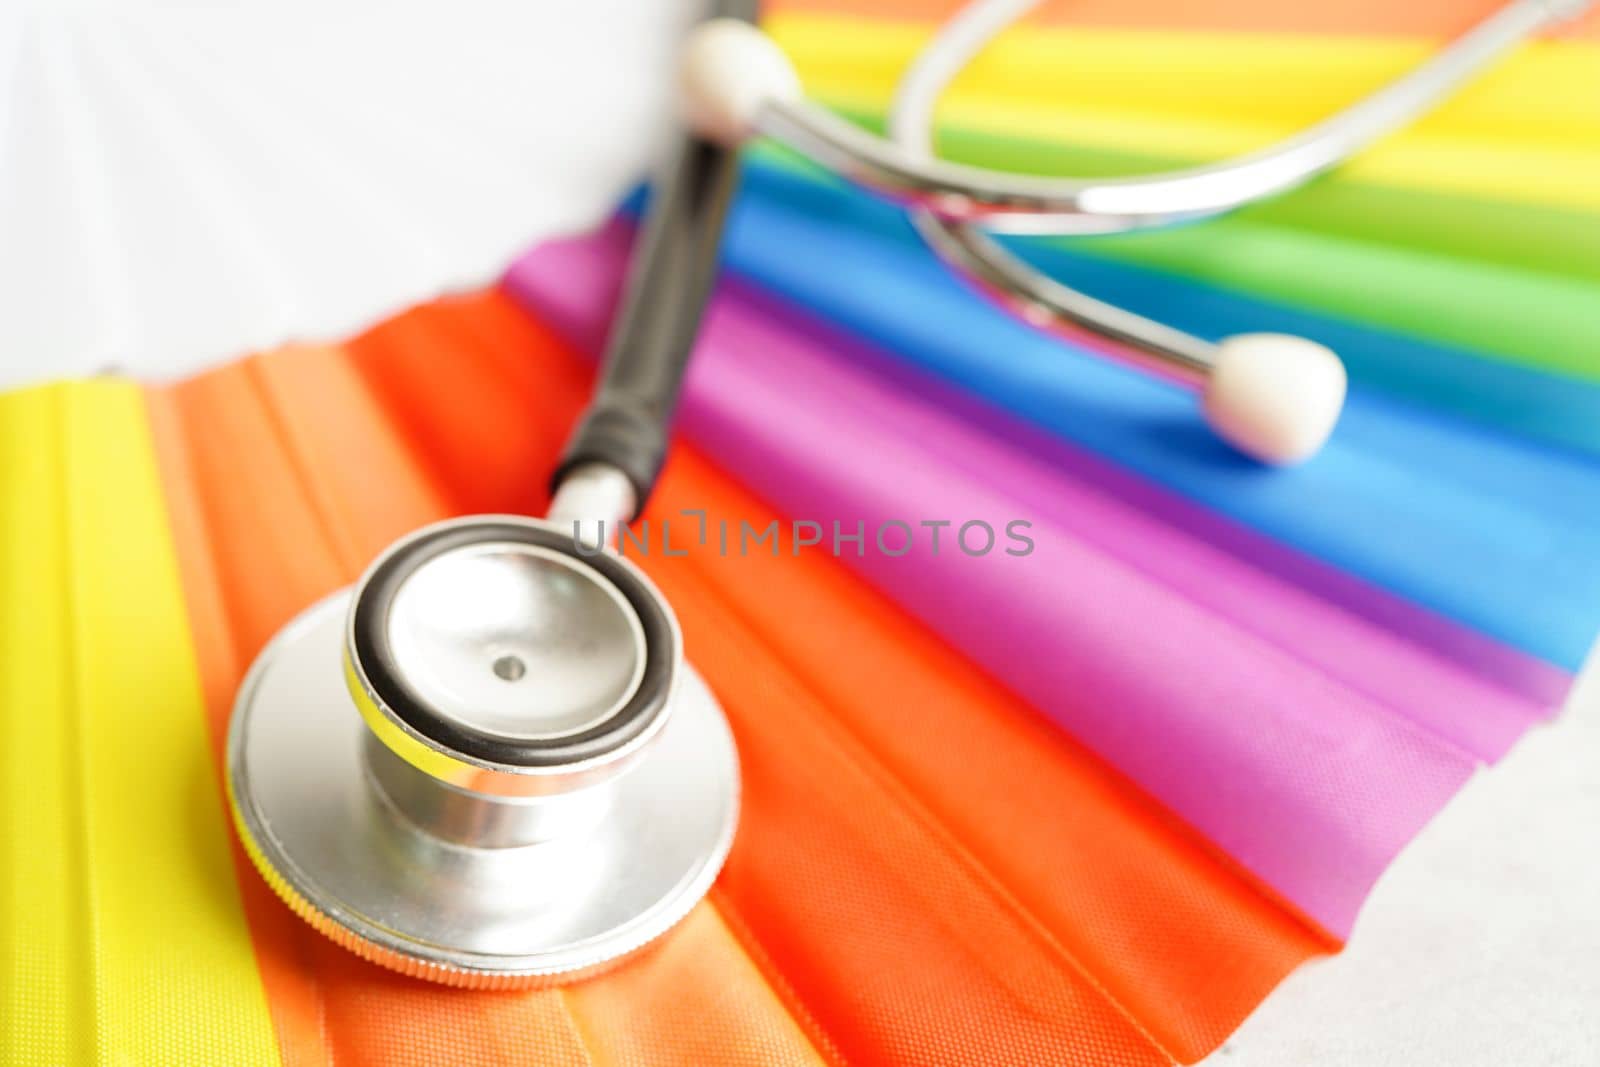 LGBT symbol, Stethoscope with rainbow ribbon, rights and gender equality, LGBT Pride Month in June. by sweettomato